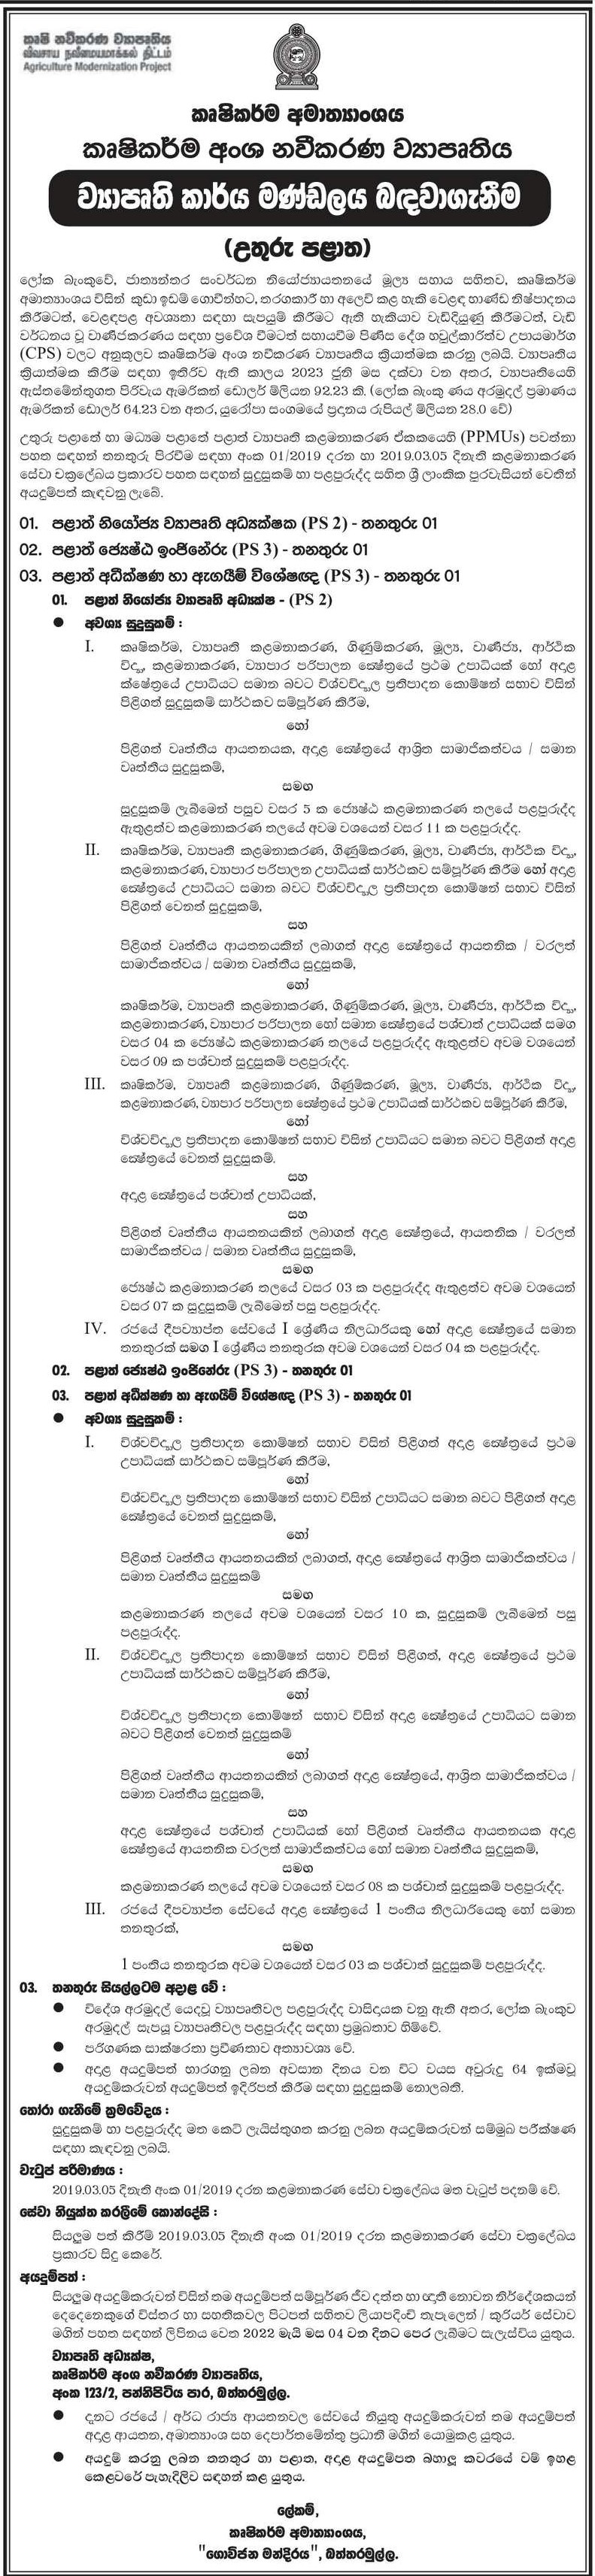 Ministry of Agriculture Vacancies 2022 Sinhala